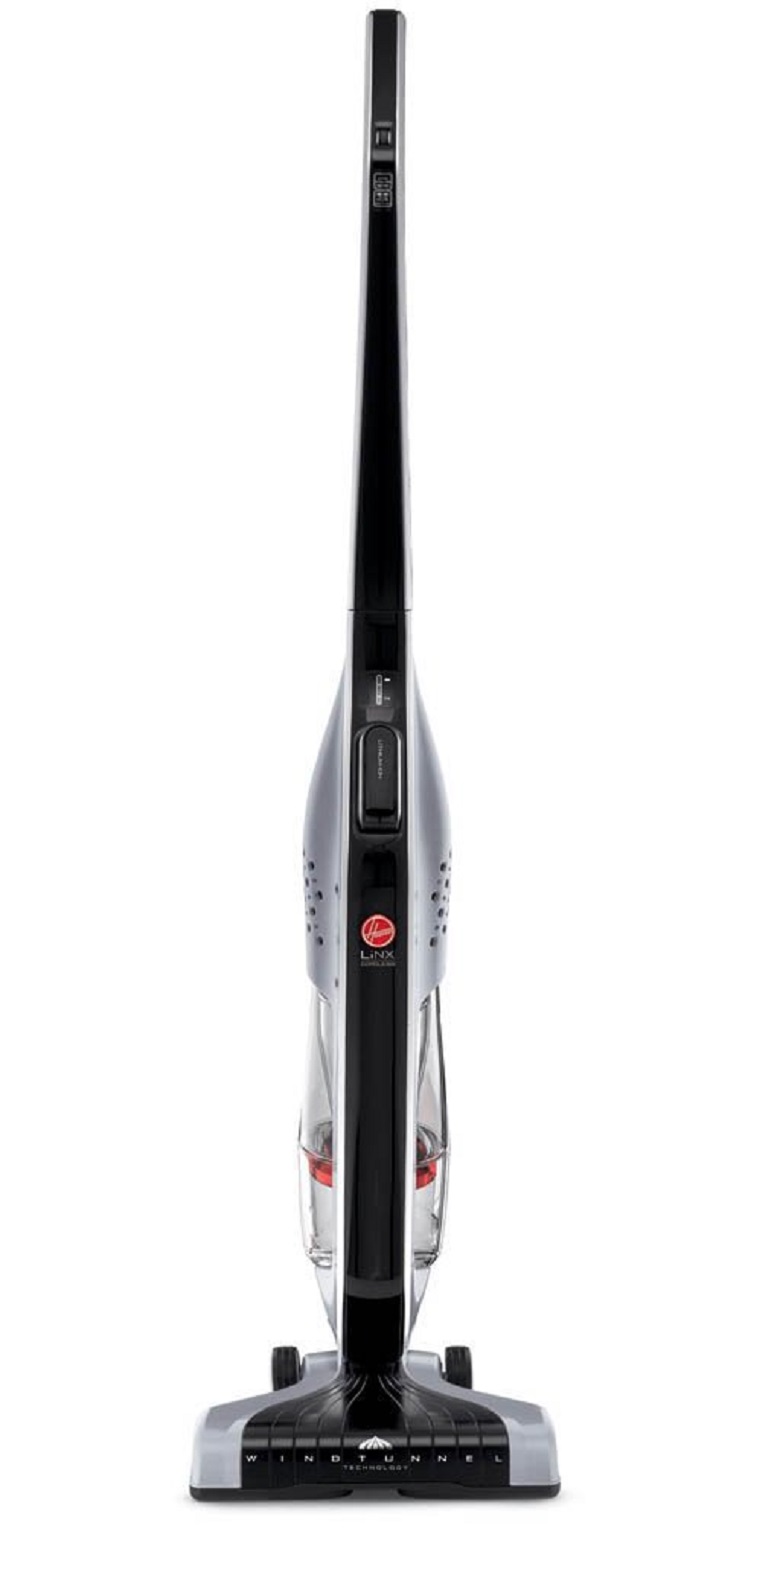 Hoover Linx Cordless Stick Vacuum Cleaner, BH50010, hoover linx, Hoover Linx BH50010, hoover linx vacuum, hoover vacuum, cordless vacuum, stick vacuum, vacuum